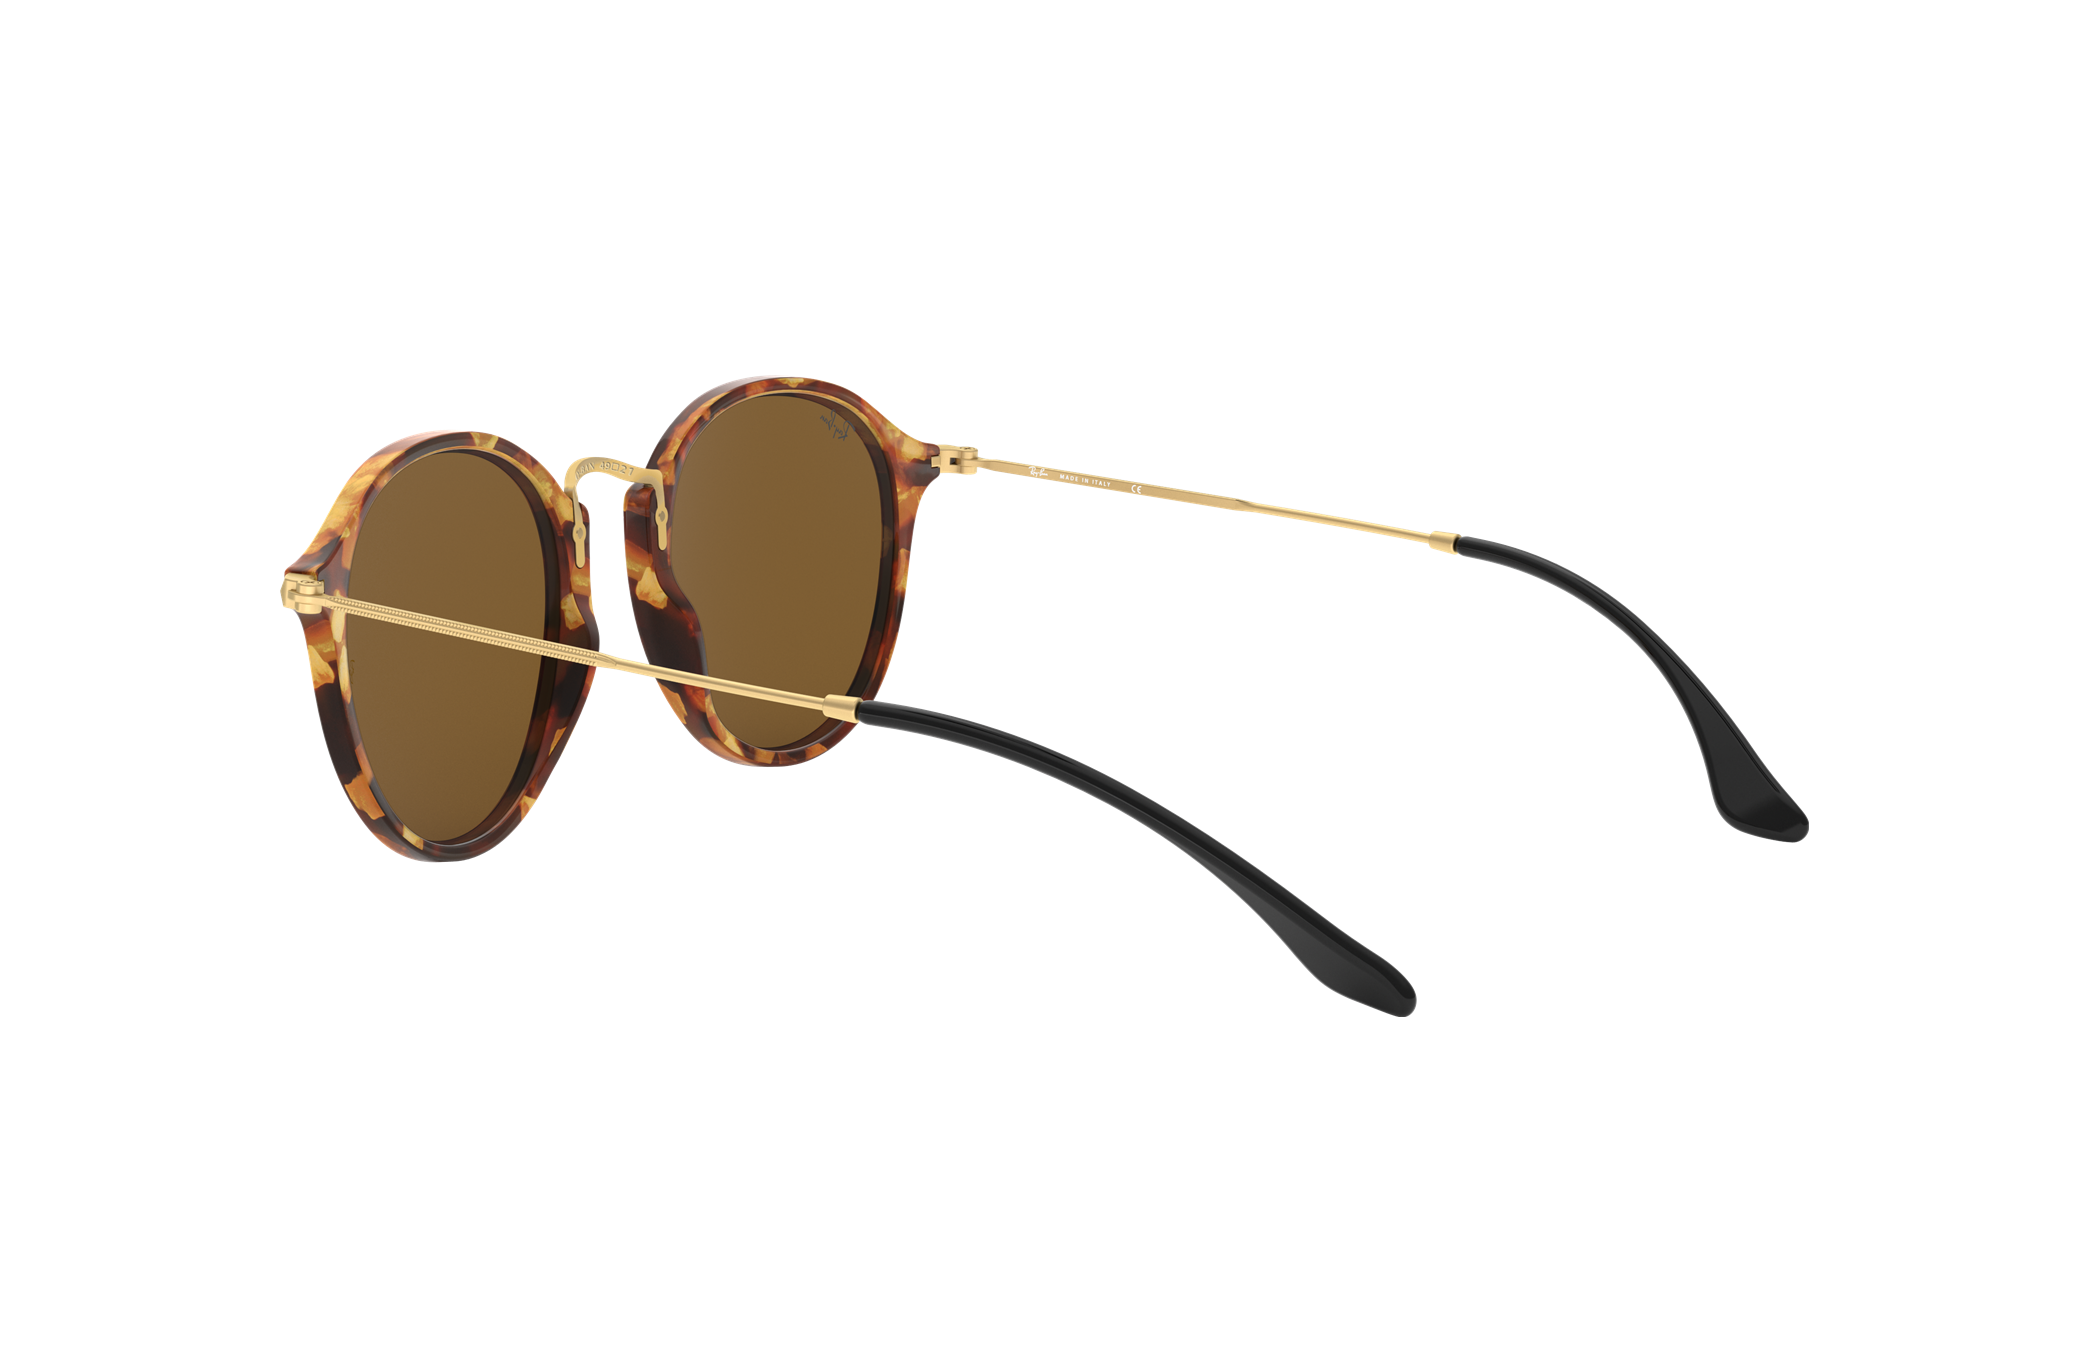 Ray-Ban Havana Spotted Round Sunglasses | Urban Outfitters